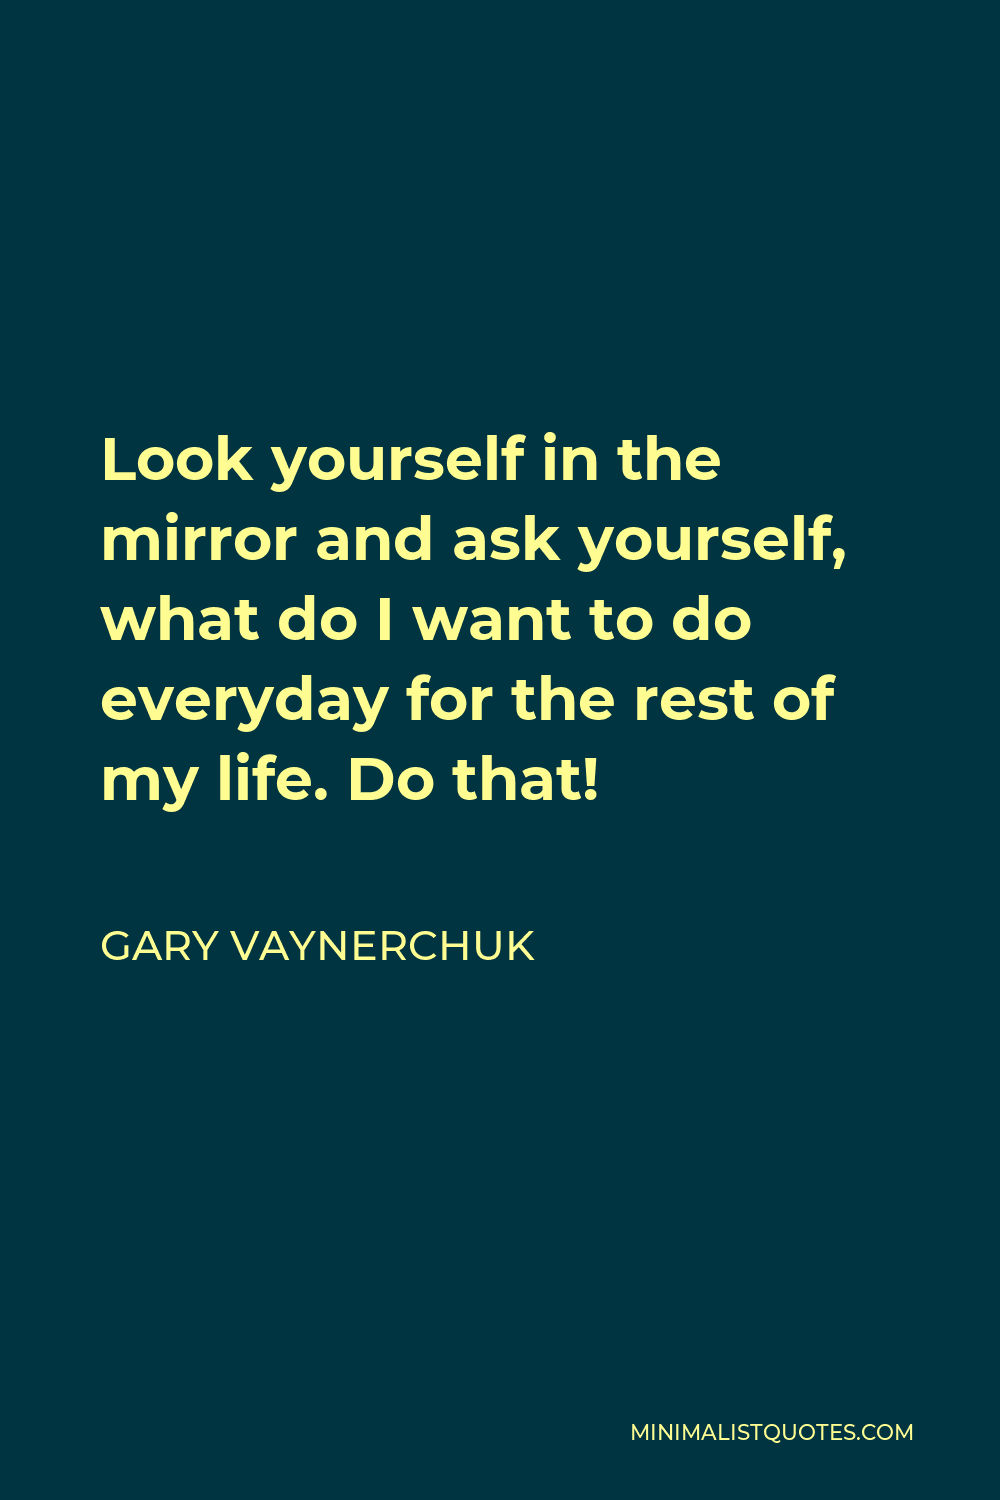 Gary Vaynerchuk Quote: “Your legacy is being written by yourself. Make the  right decisions.”